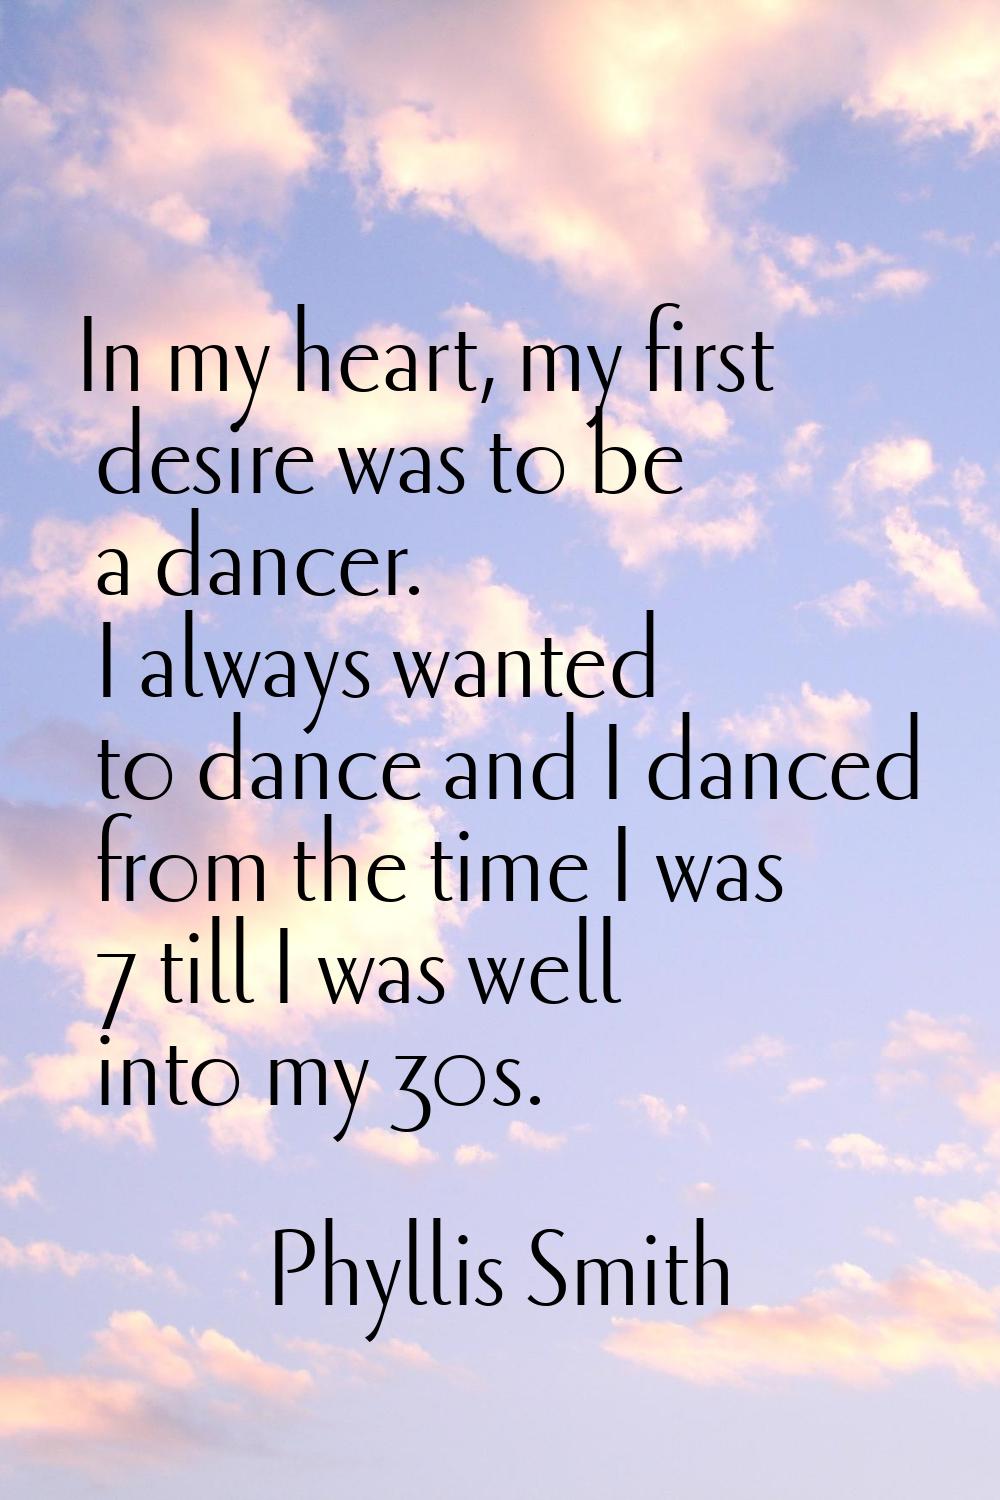 In my heart, my first desire was to be a dancer. I always wanted to dance and I danced from the tim